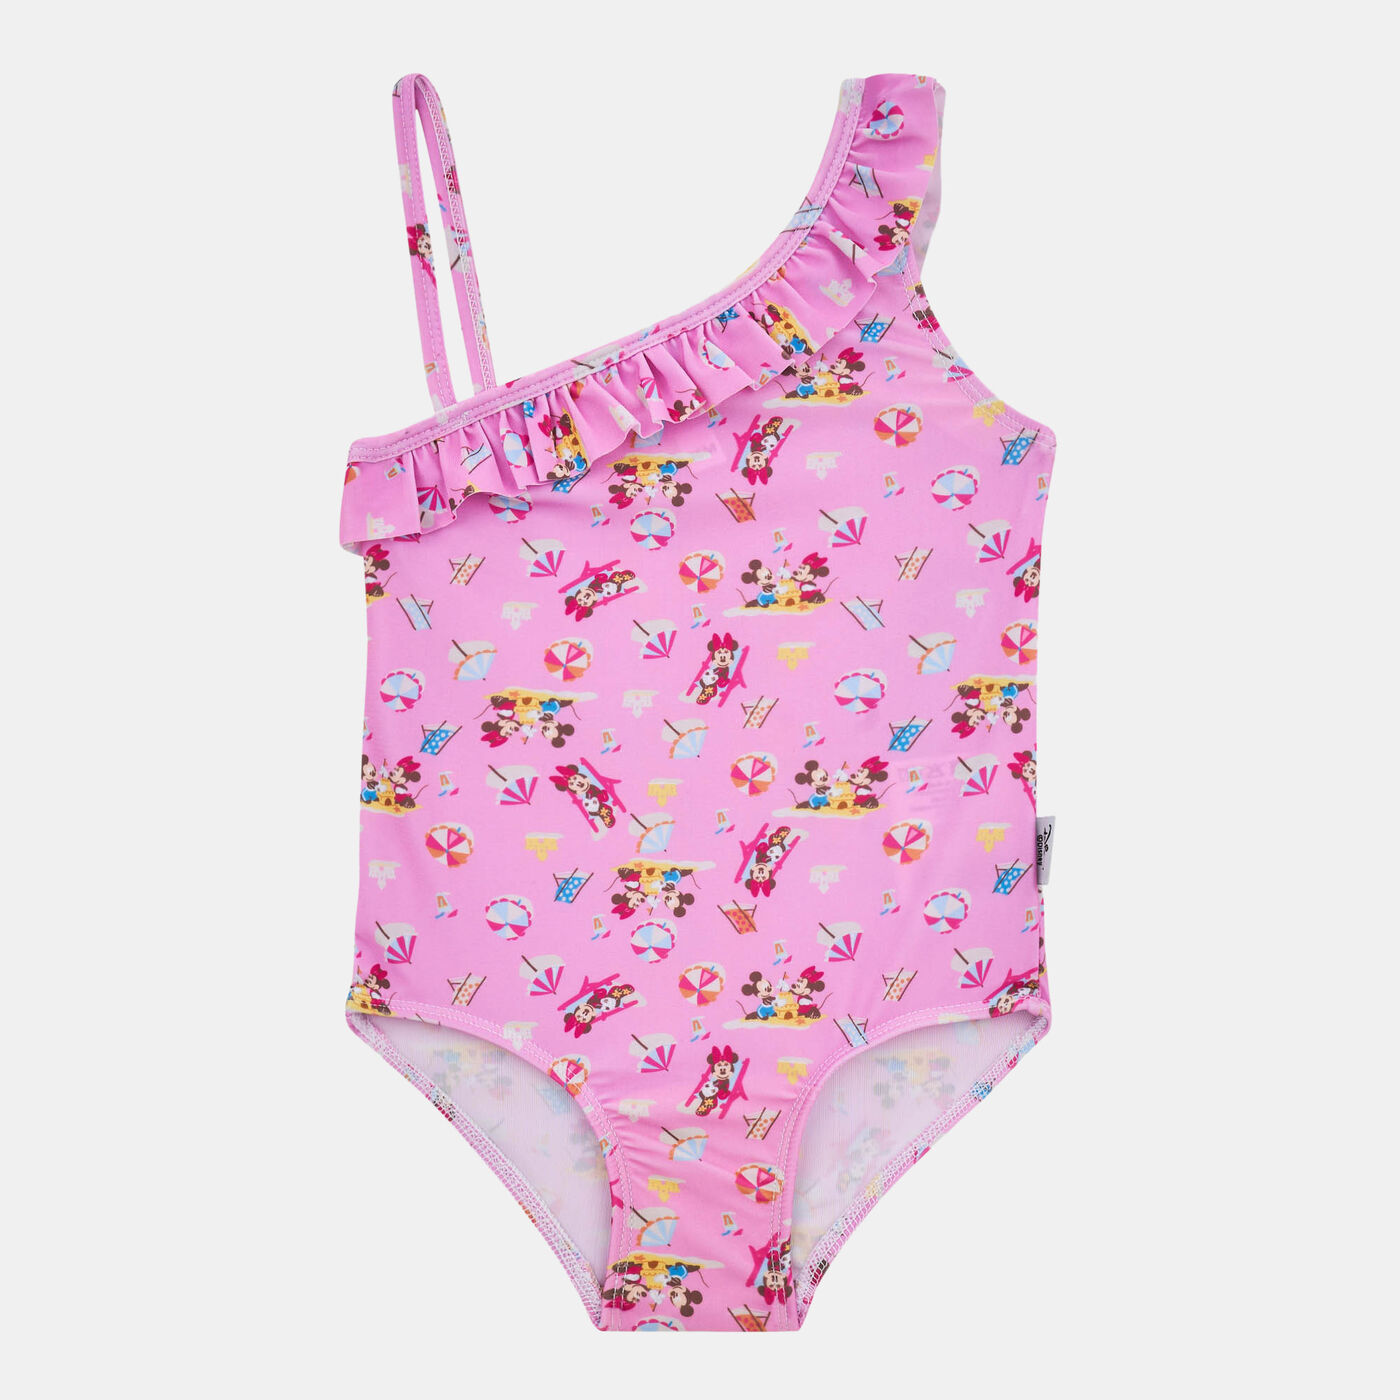 Kids' Frill One-Piece Swimsuit